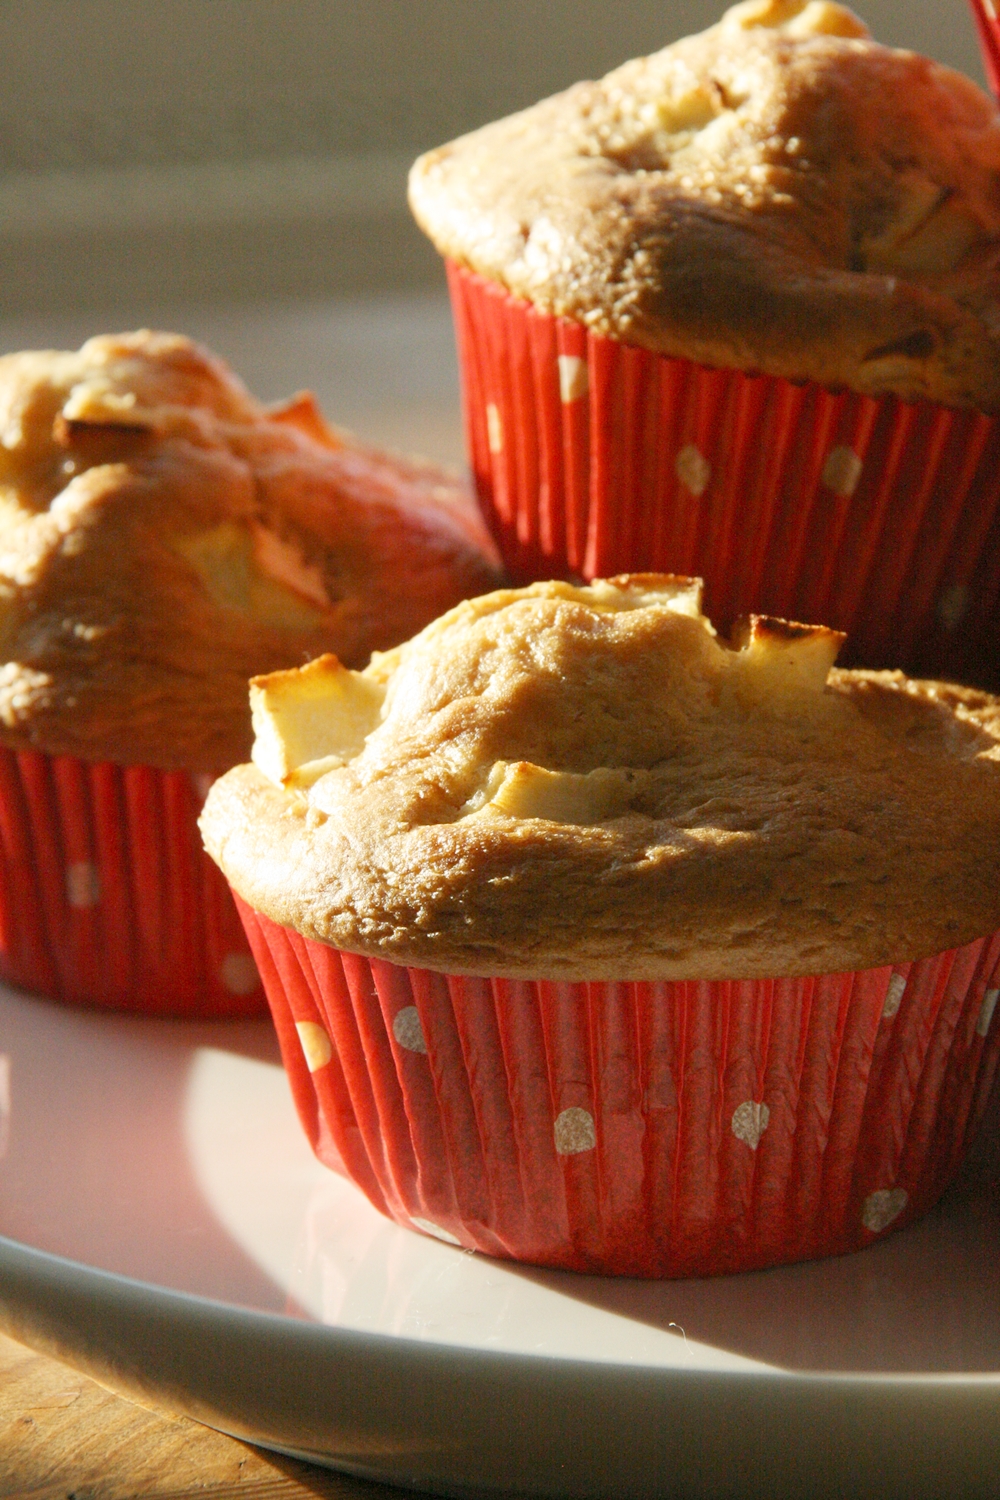 Froilein Suse***: apfel-joghurt-muffins